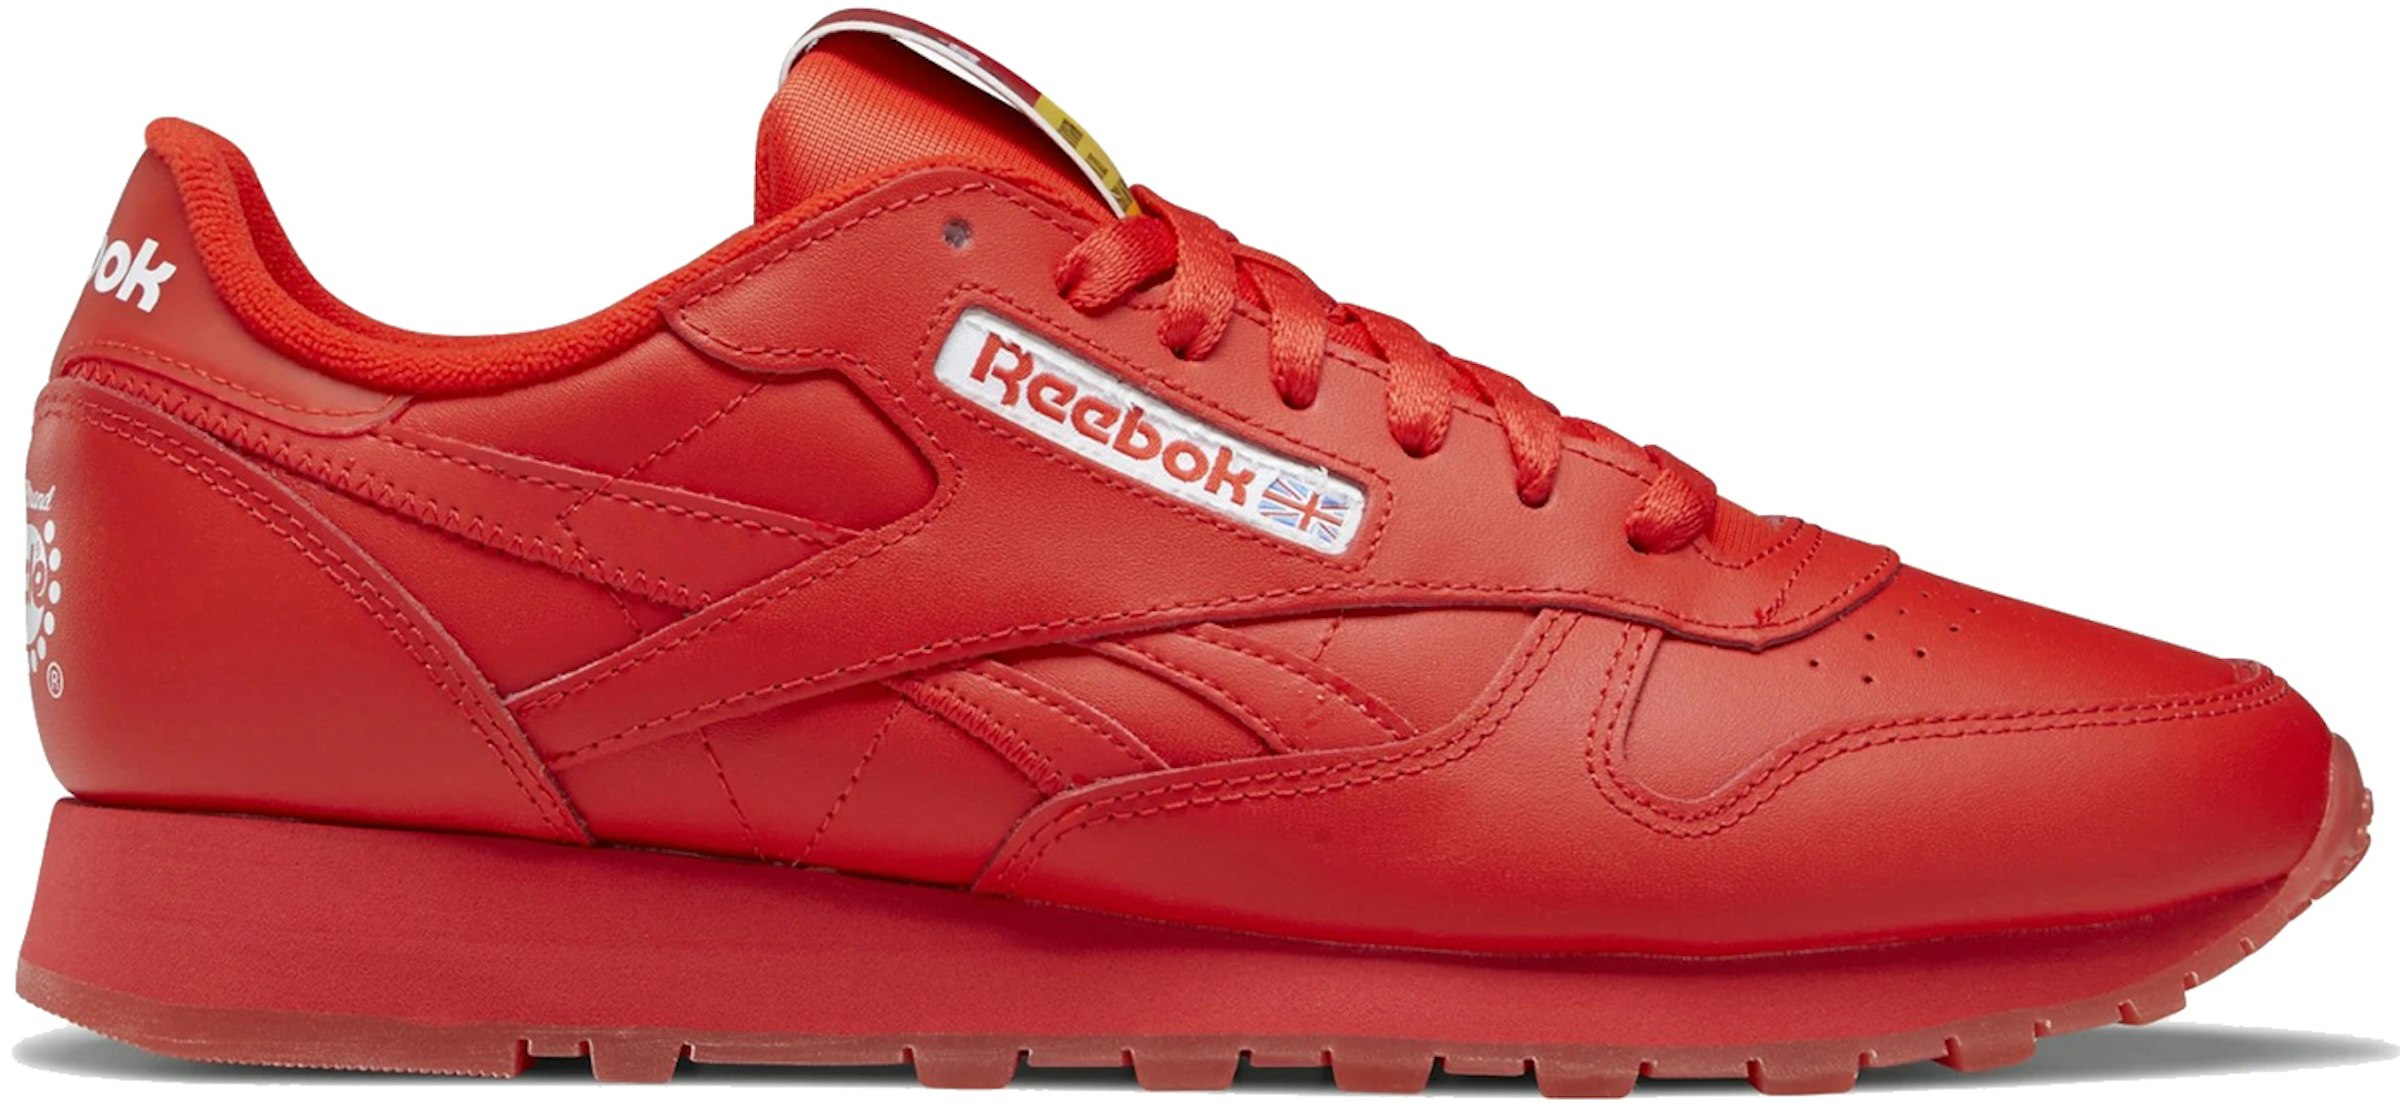 Reebok Classic Popsicle Red Men's - GY2436 - US